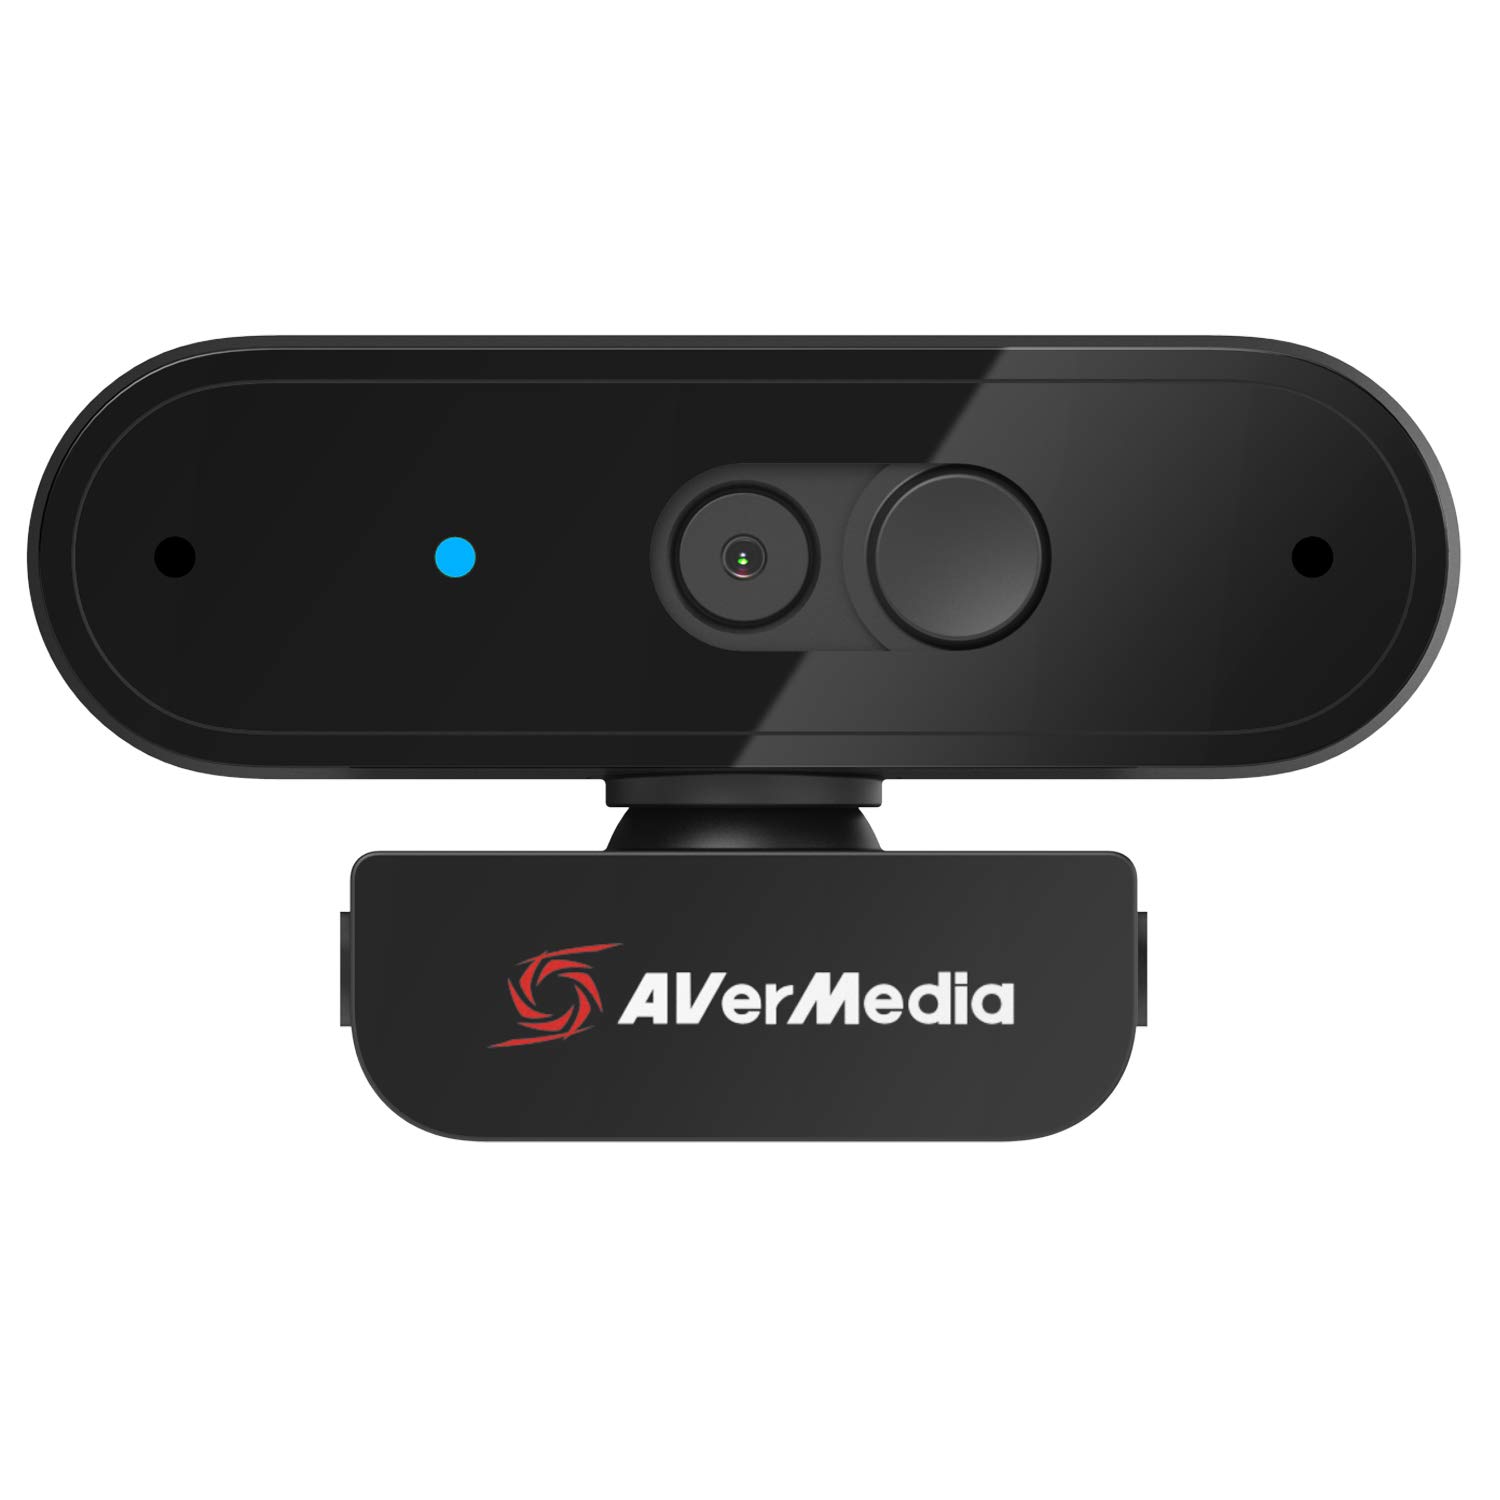 AVerMedia PW310P Webcam, Webcam Cover, 1080p/30fps Videochat and Recording, Plug and Play, Microphones, Stream, Autofocus, Works with Skype, Zoom, Team - Black